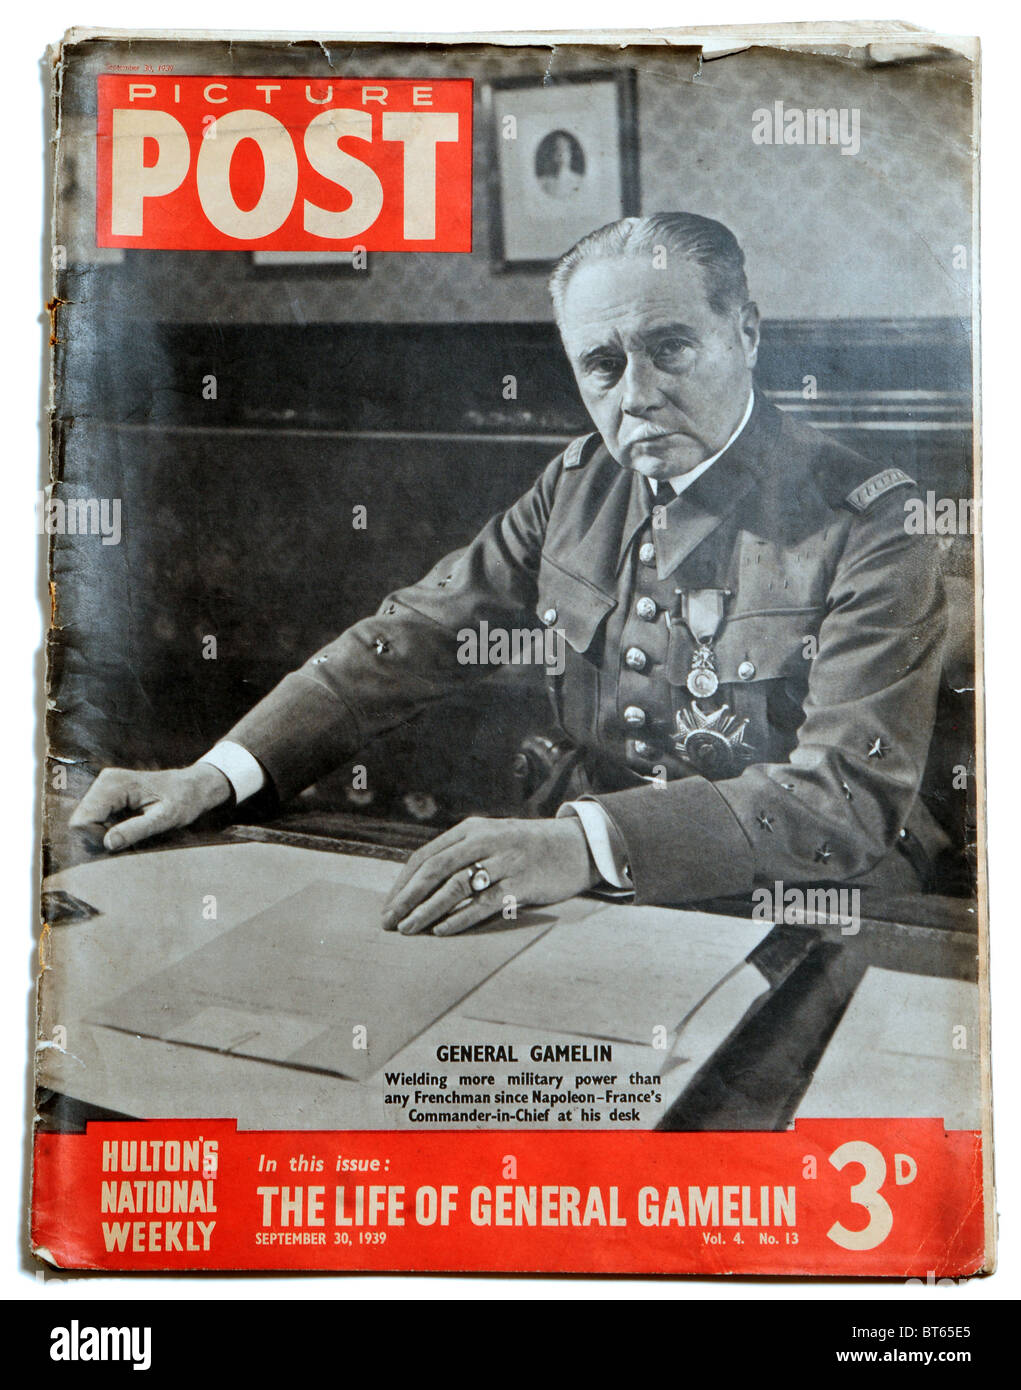 30 september 1939 general gamelin commander in chief french france army Picture Post prominent photojournalistic magazine publis Stock Photo